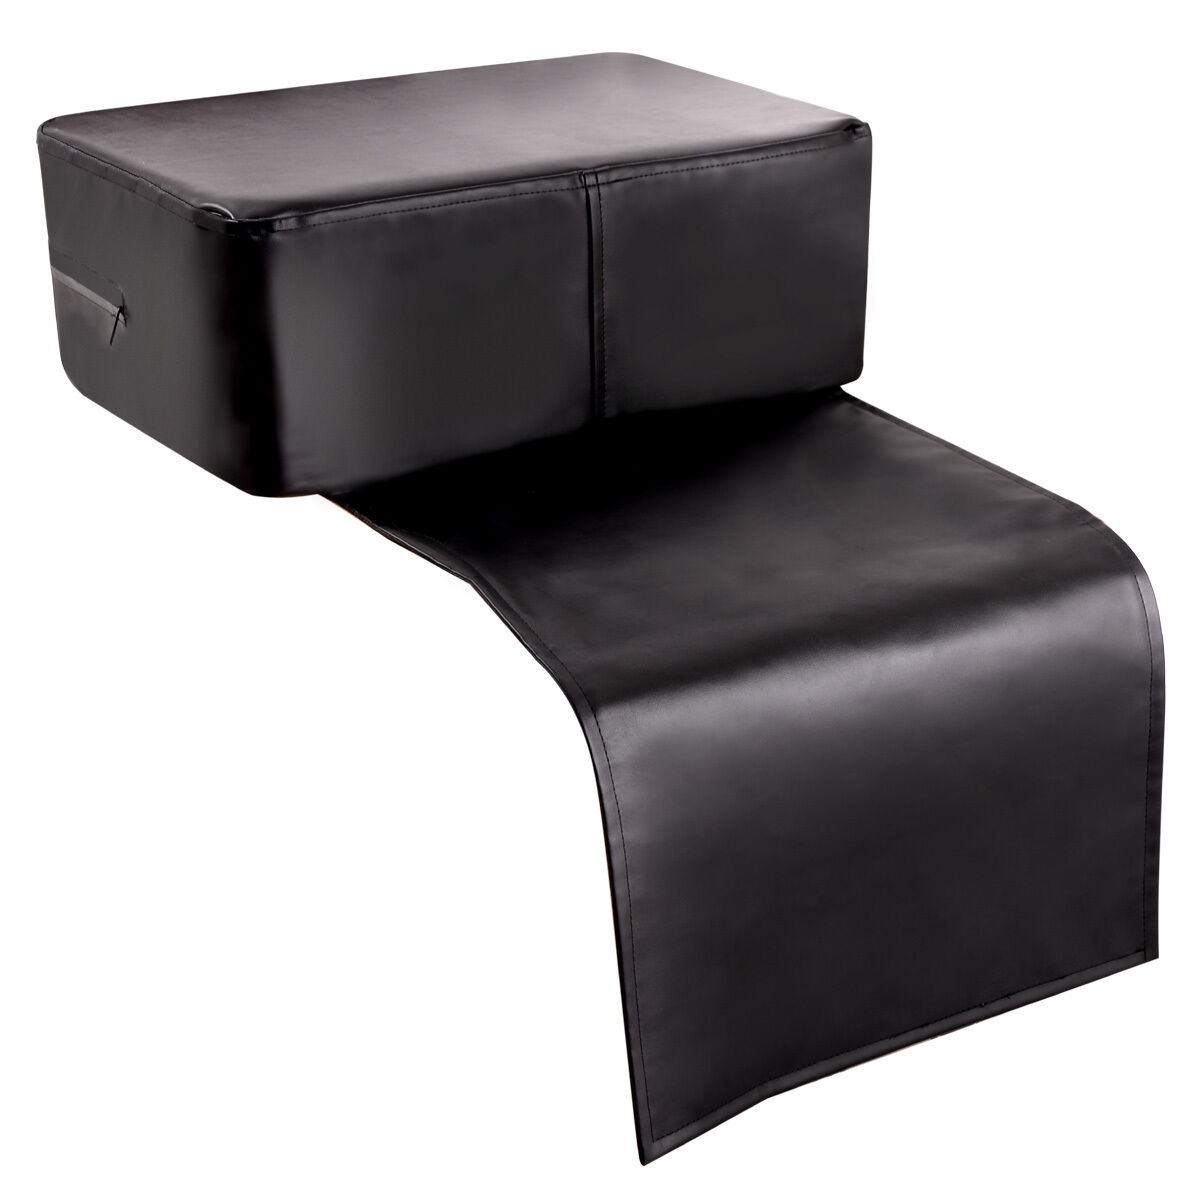 Black Barber Beauty Salon Spa Equipment Styling Chair Booster Child Seat Cushion